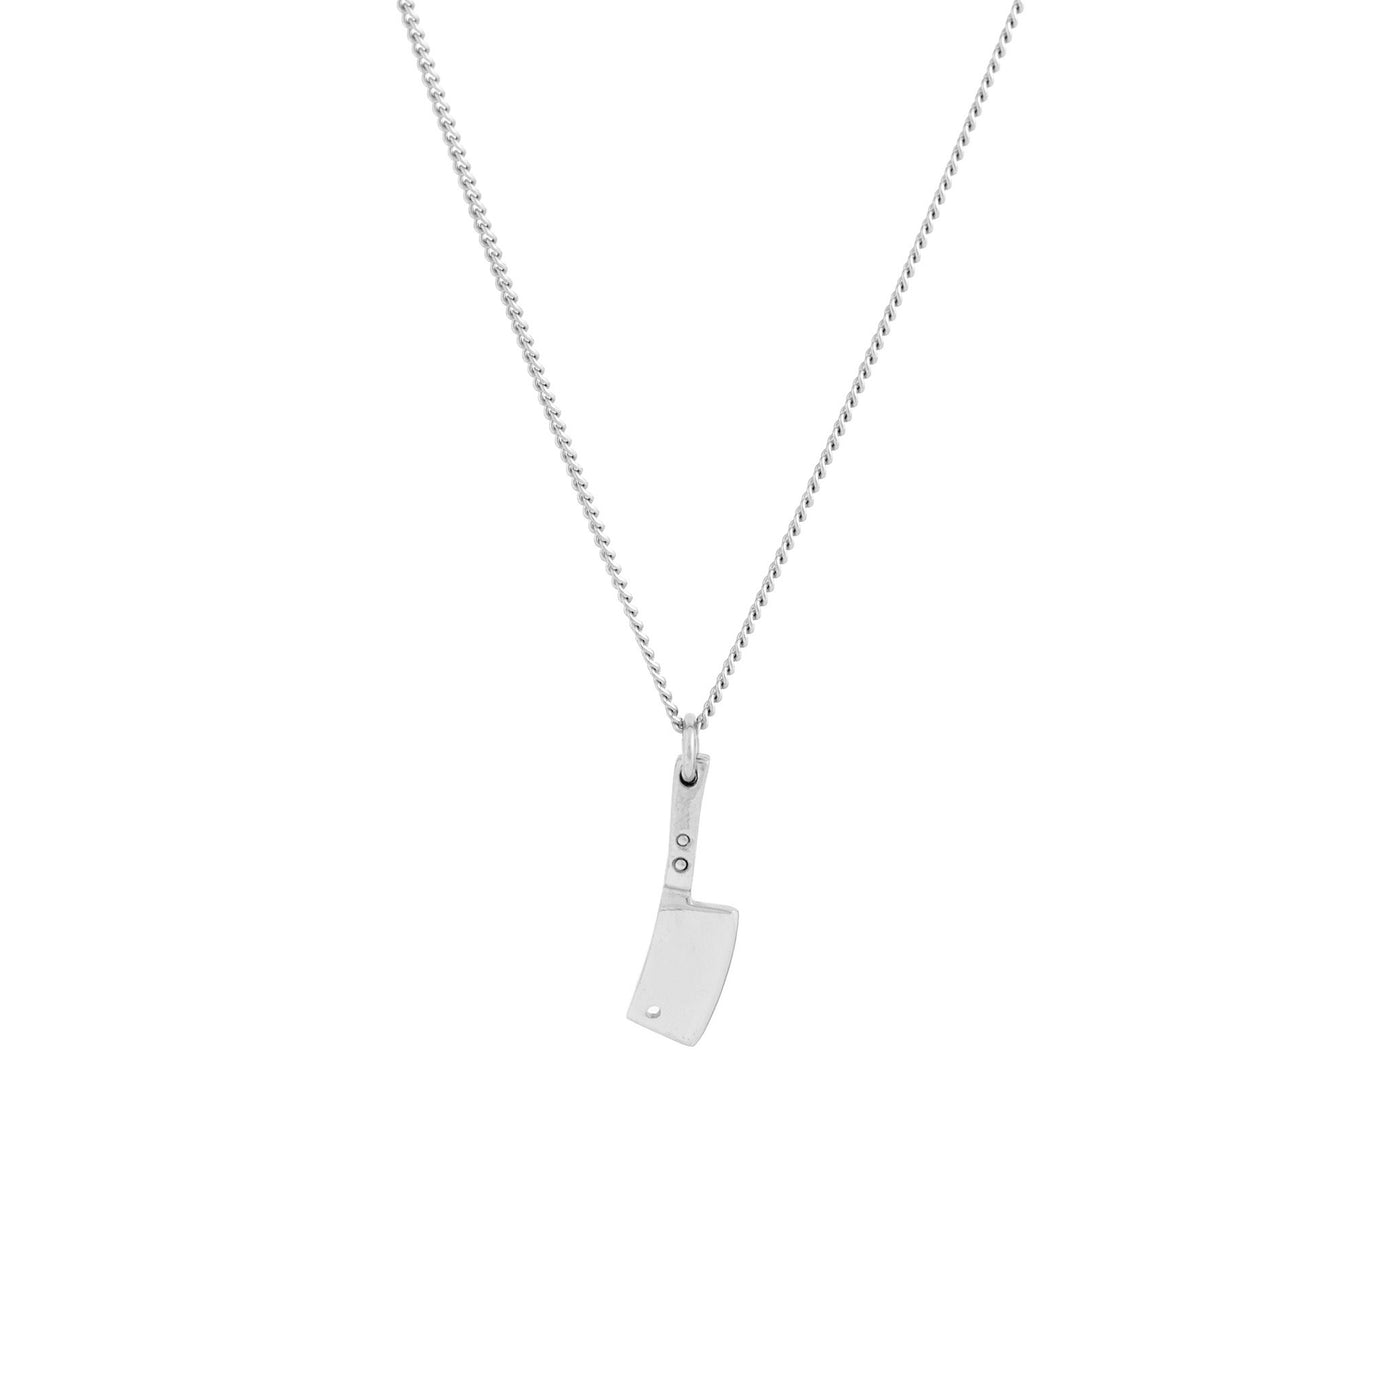 Cleaver necklace